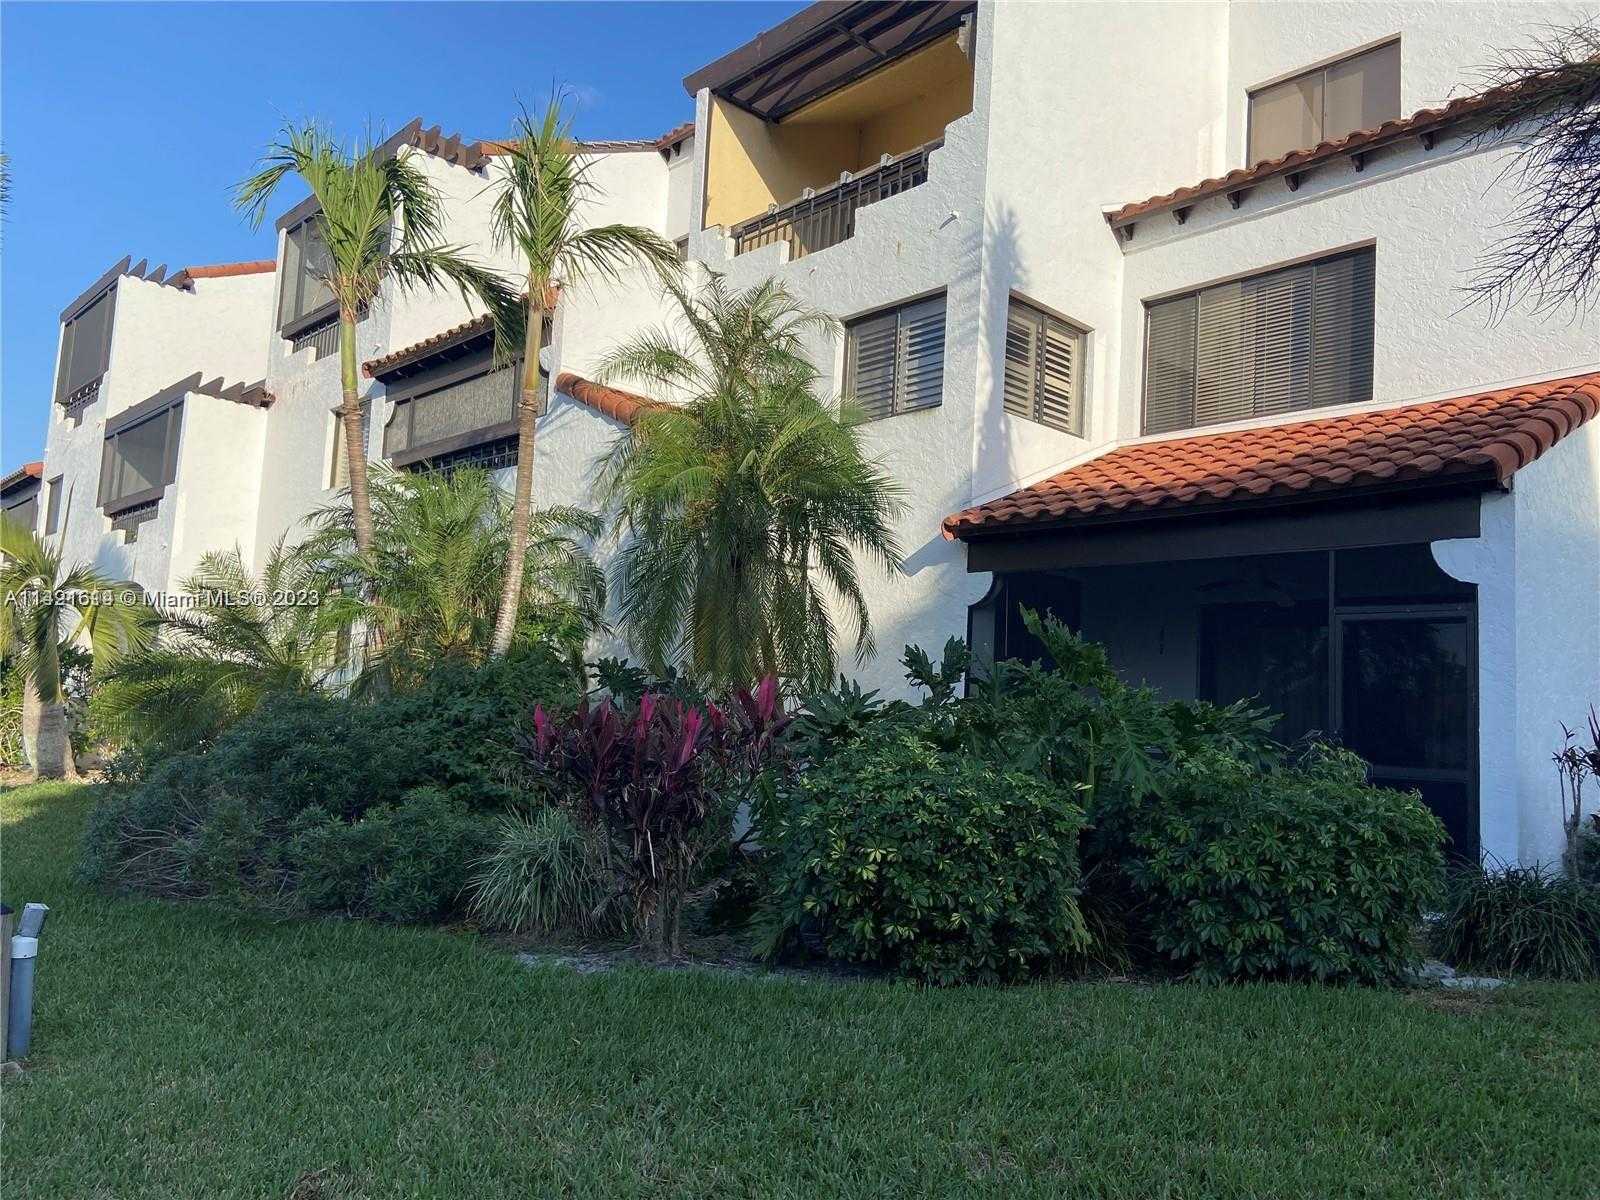 View Fort Myers, FL 33908 condo